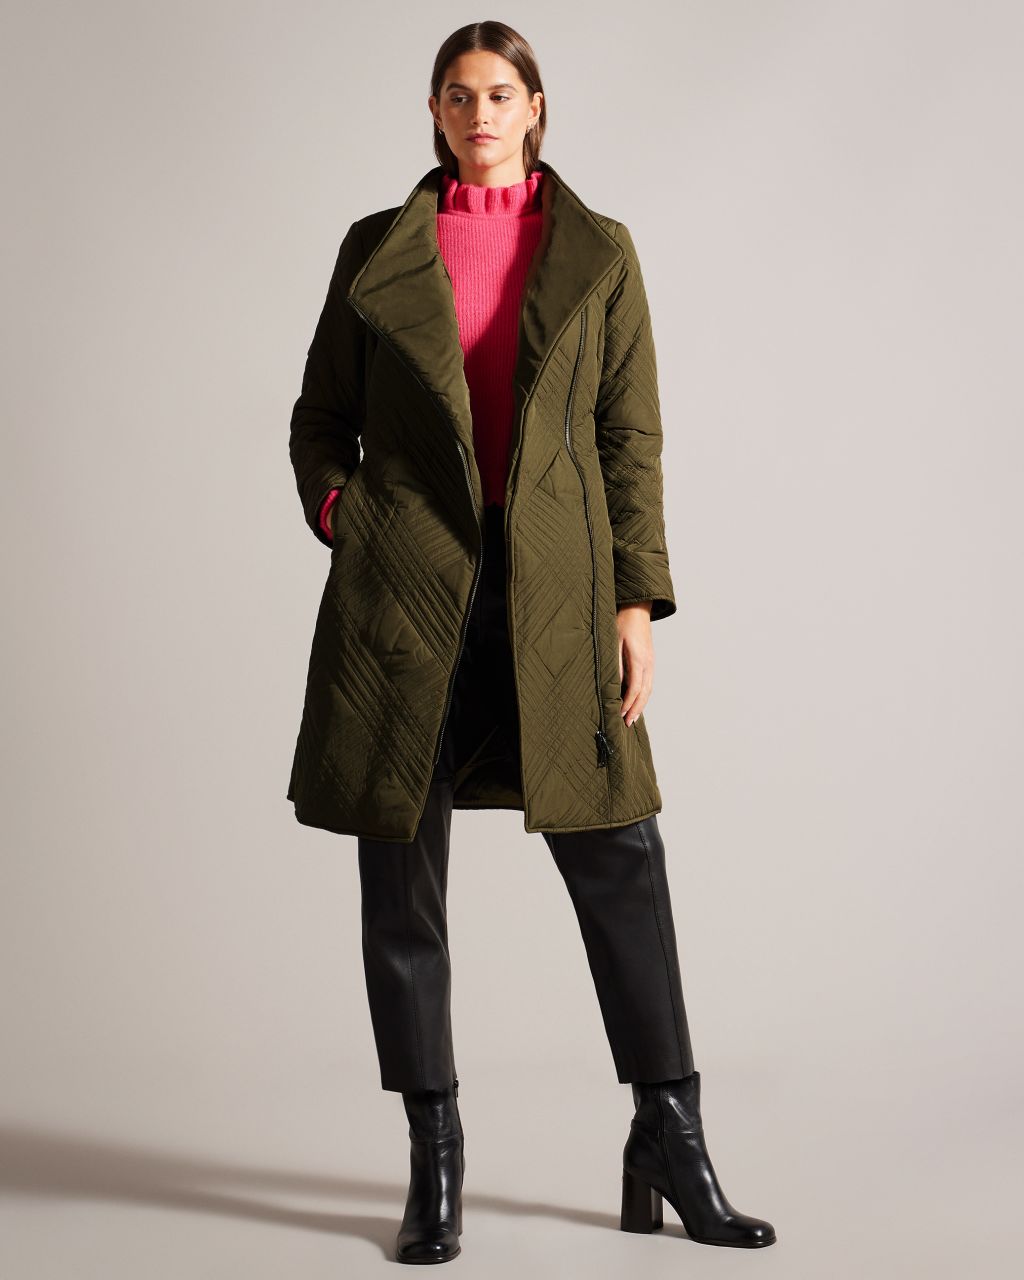 Women's Midi Quilted Wrap Coat With High Collar in Khaki, Rosemae